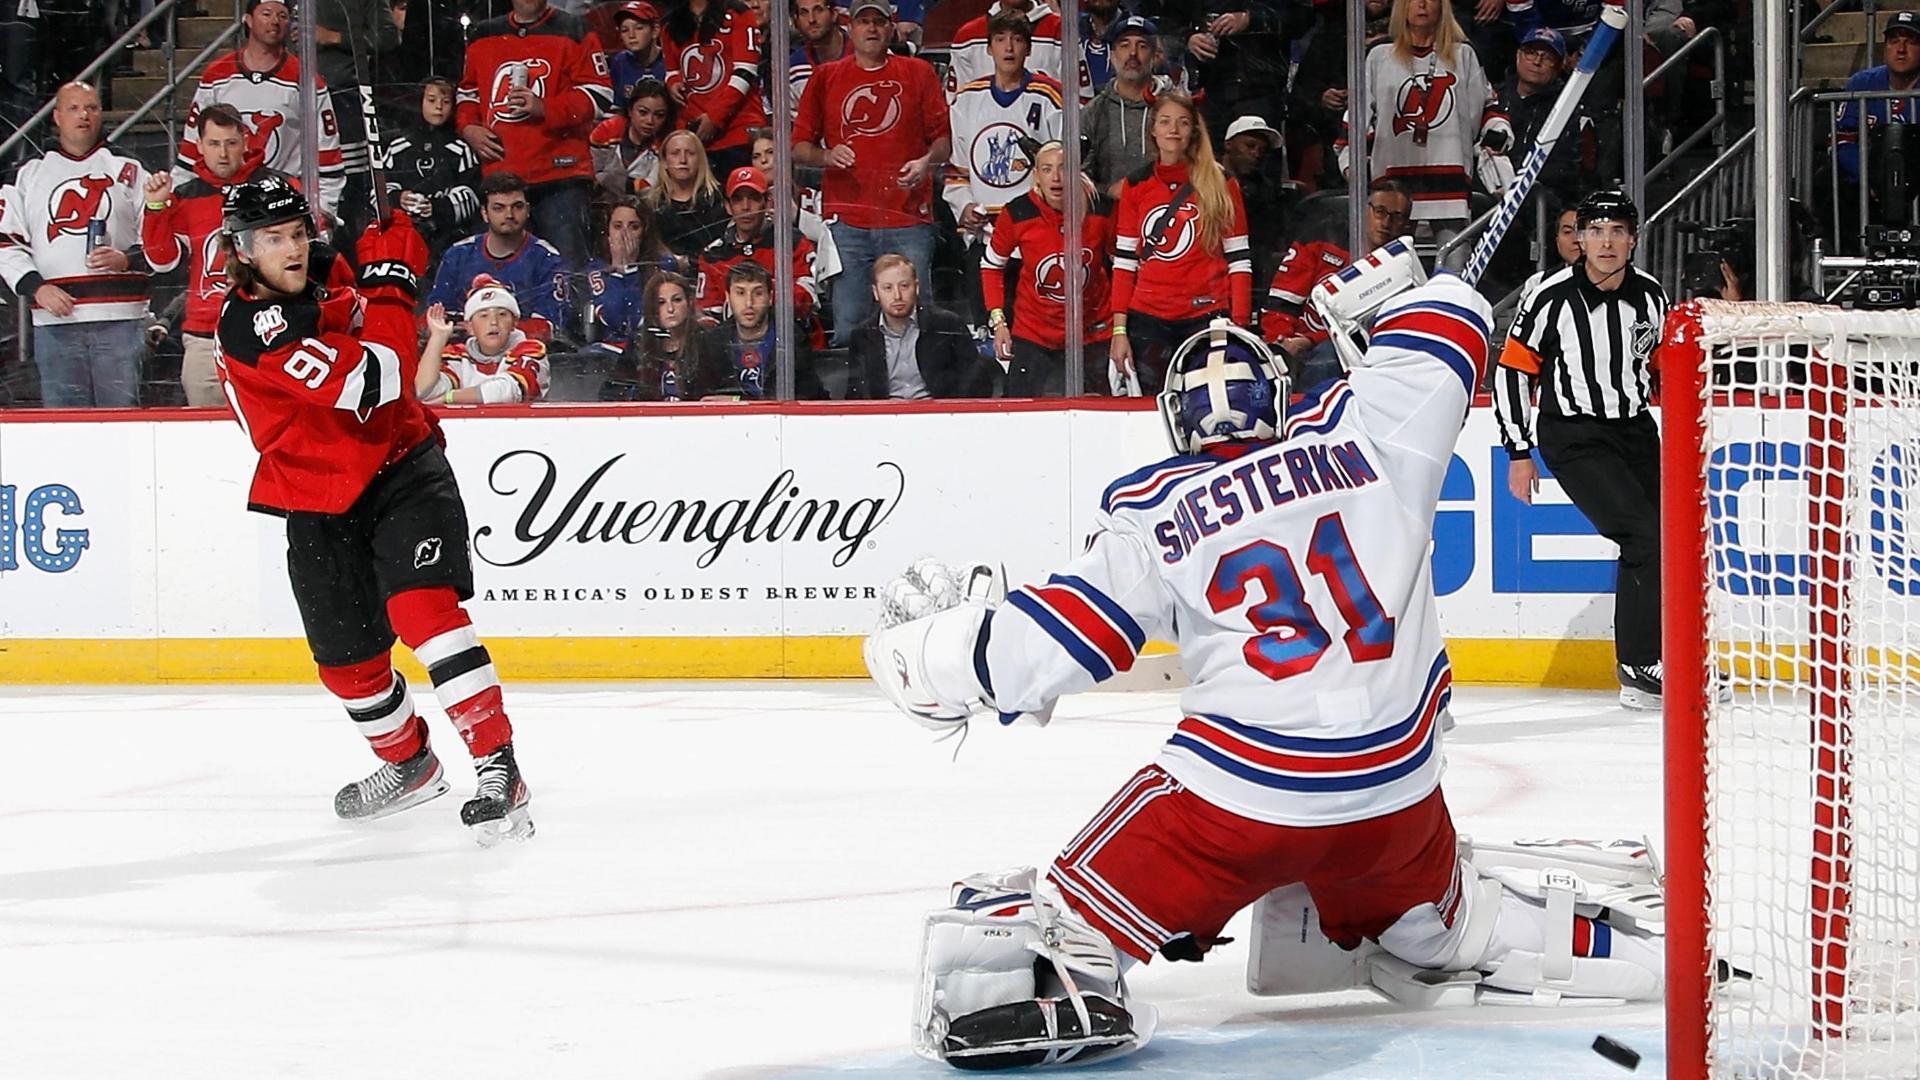 Rangers lose to Devils again, shift focus to must-win Game 6 - ESPN